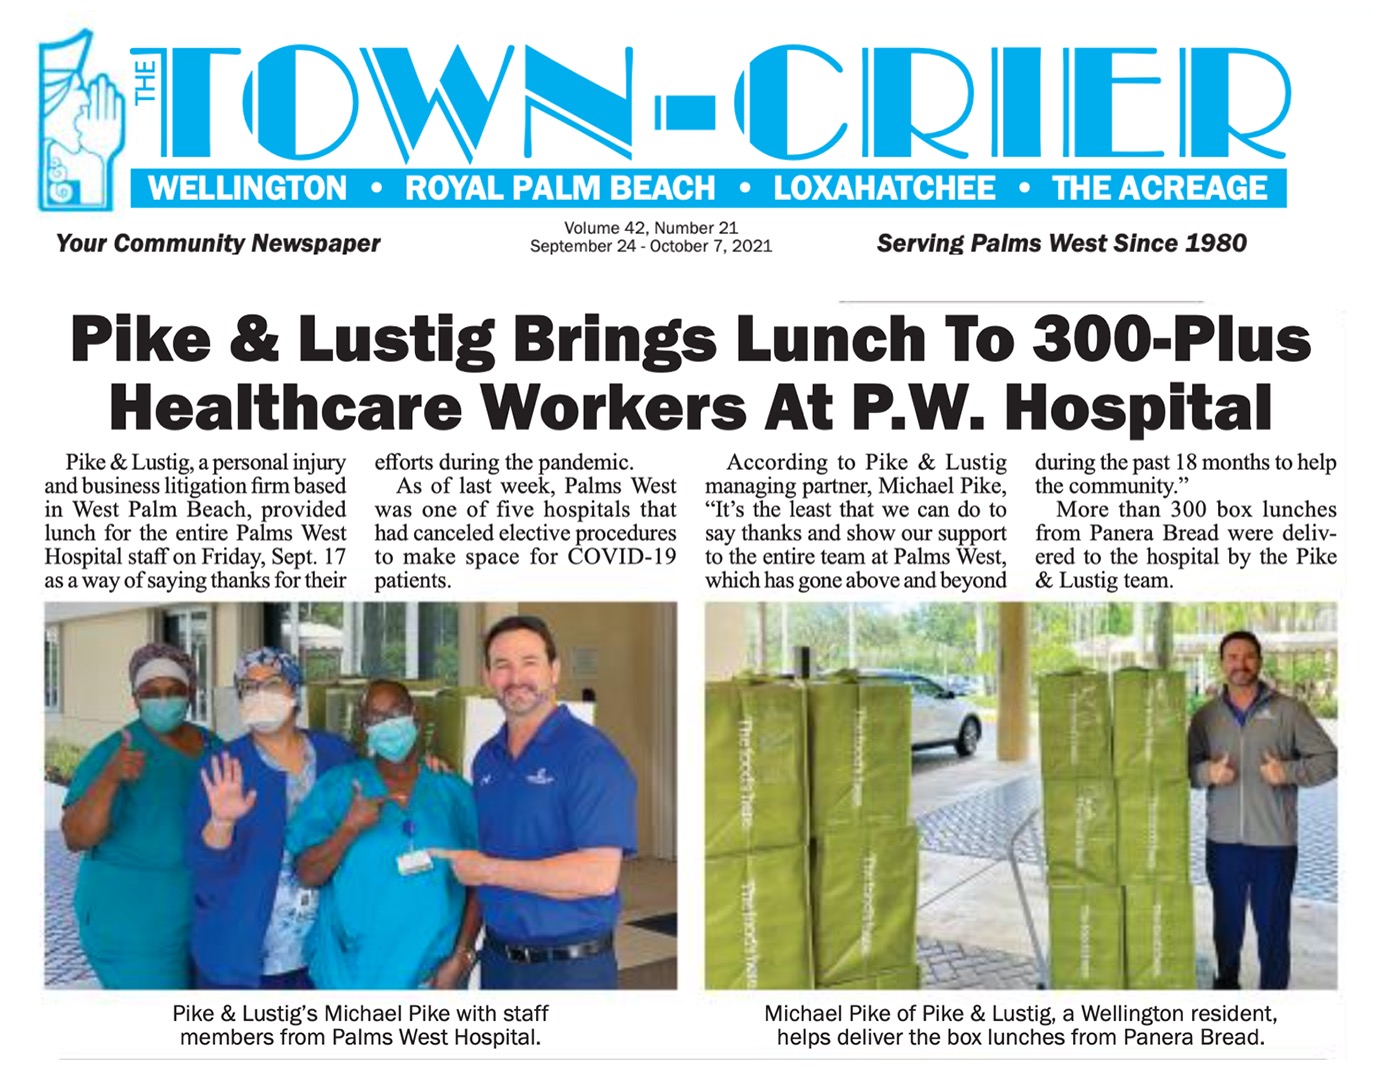 Pike & Lustig Brings Lunch To 300-Plus Healthcare Workers At P.W. Hospital